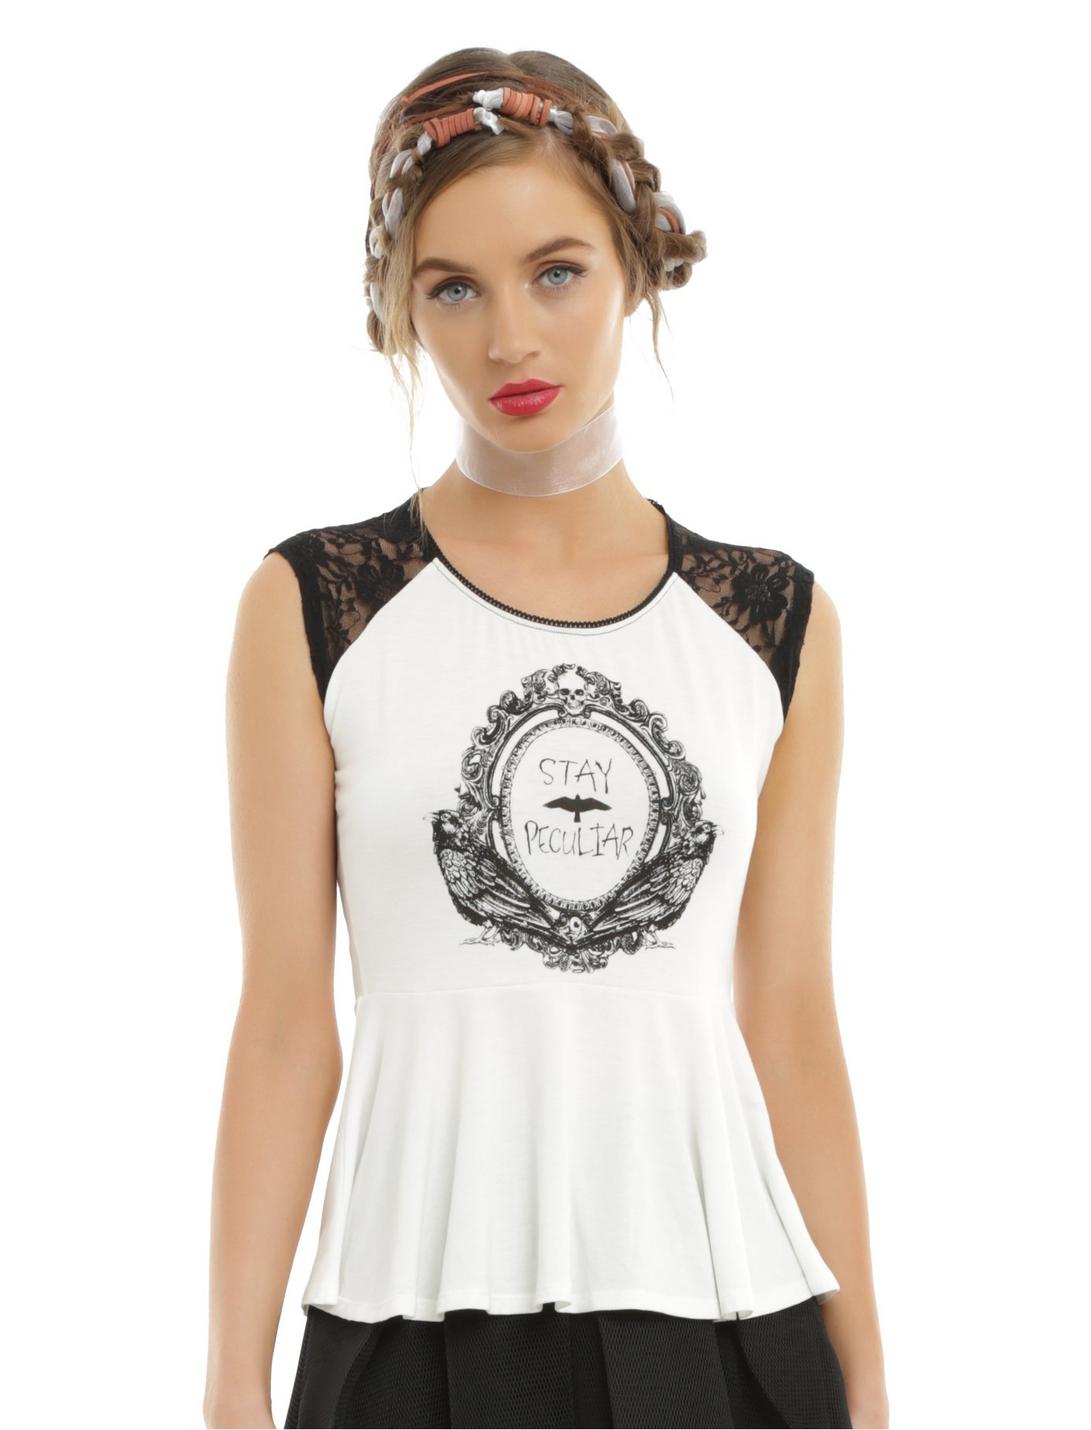 Miss Peregrine's Home For Peculiar Children Stay Peculiar Girls Peplum Tank Top, WHITE, hi-res